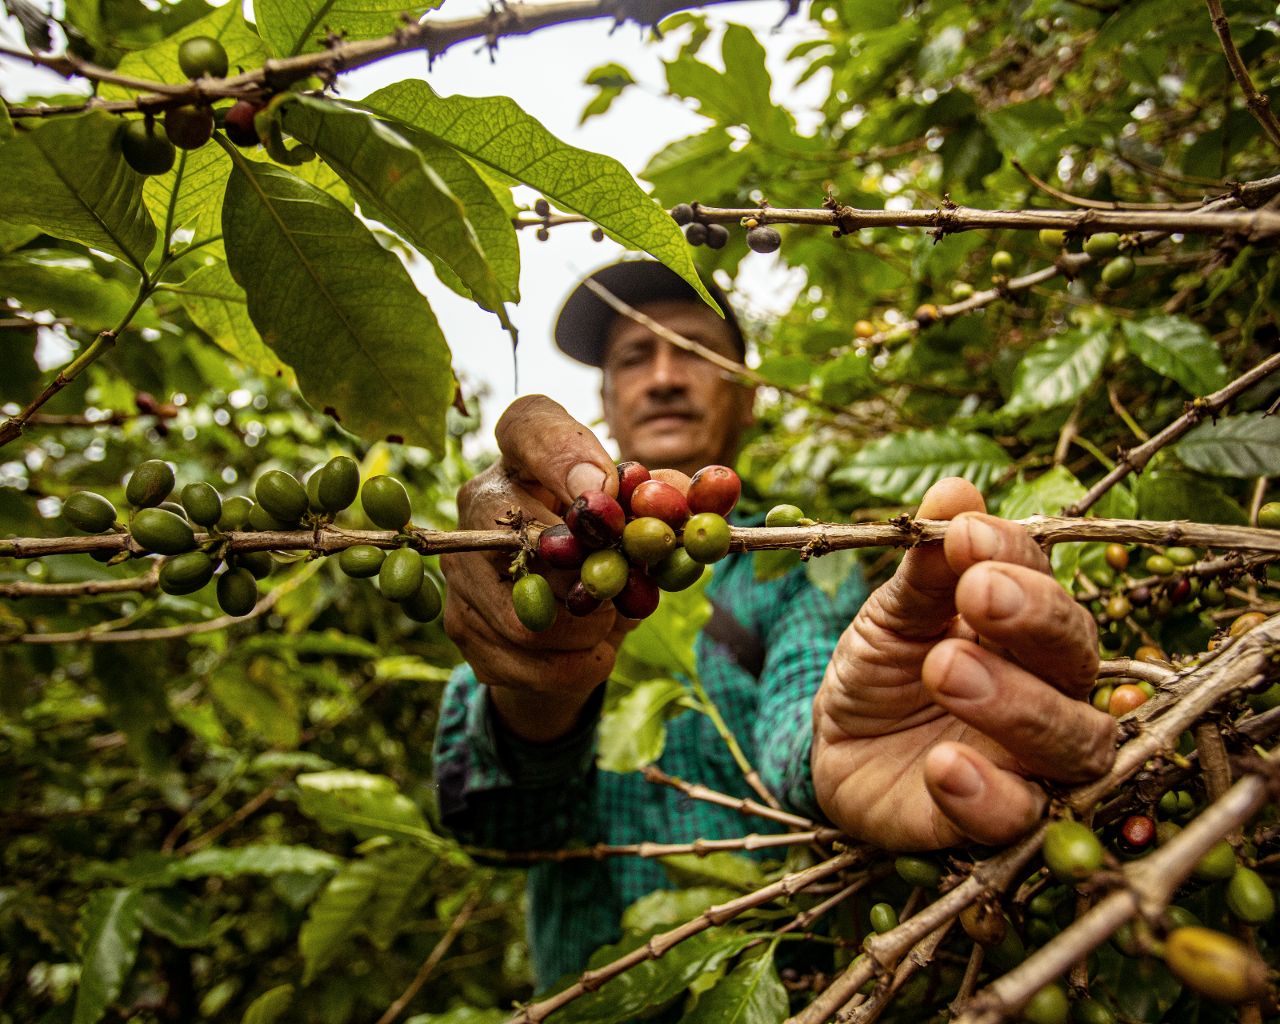 Coffee farmer checking coffee cherries for diseases and effects of climate change